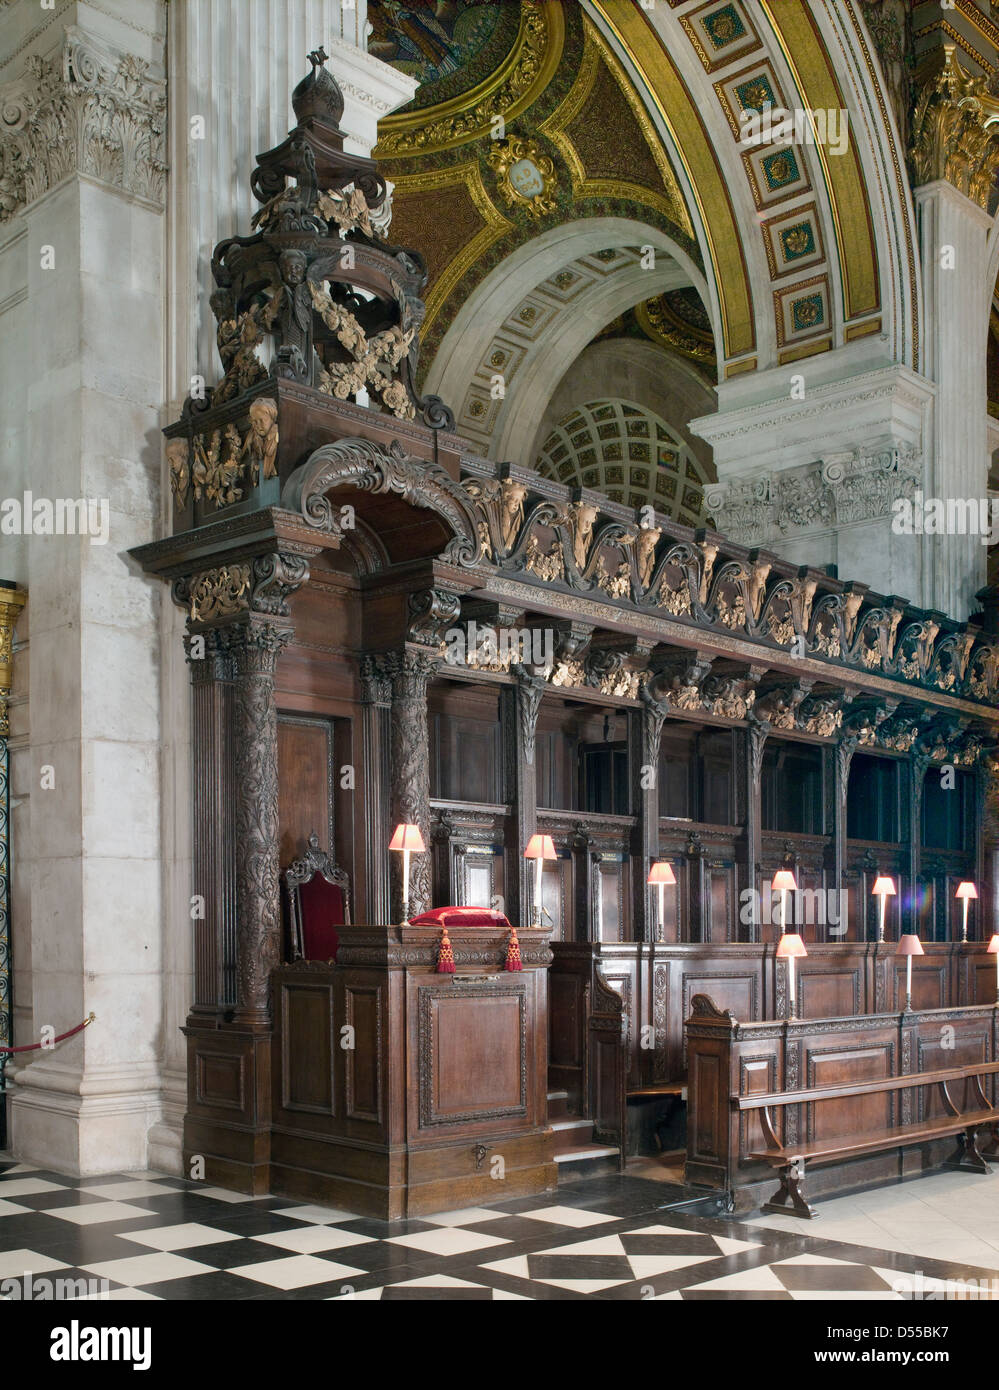 Bishop's throne, Saint Paul's Cathedral London Stock Photo